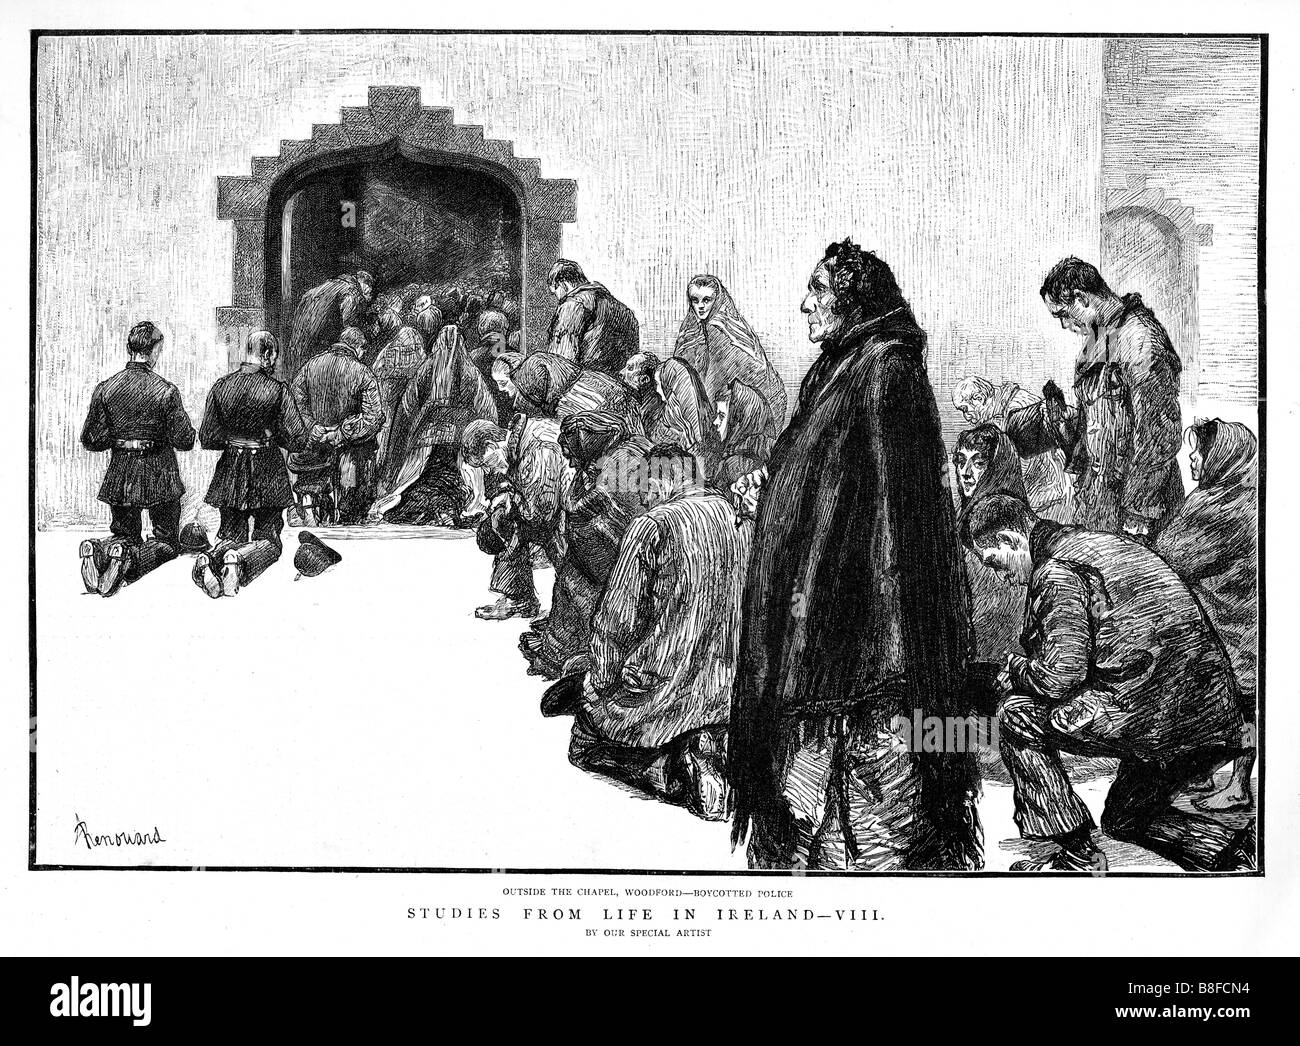 Boycotted Police outside the Church 1888 engraving of life in Ireland with policemen worshipping outside Stock Photo